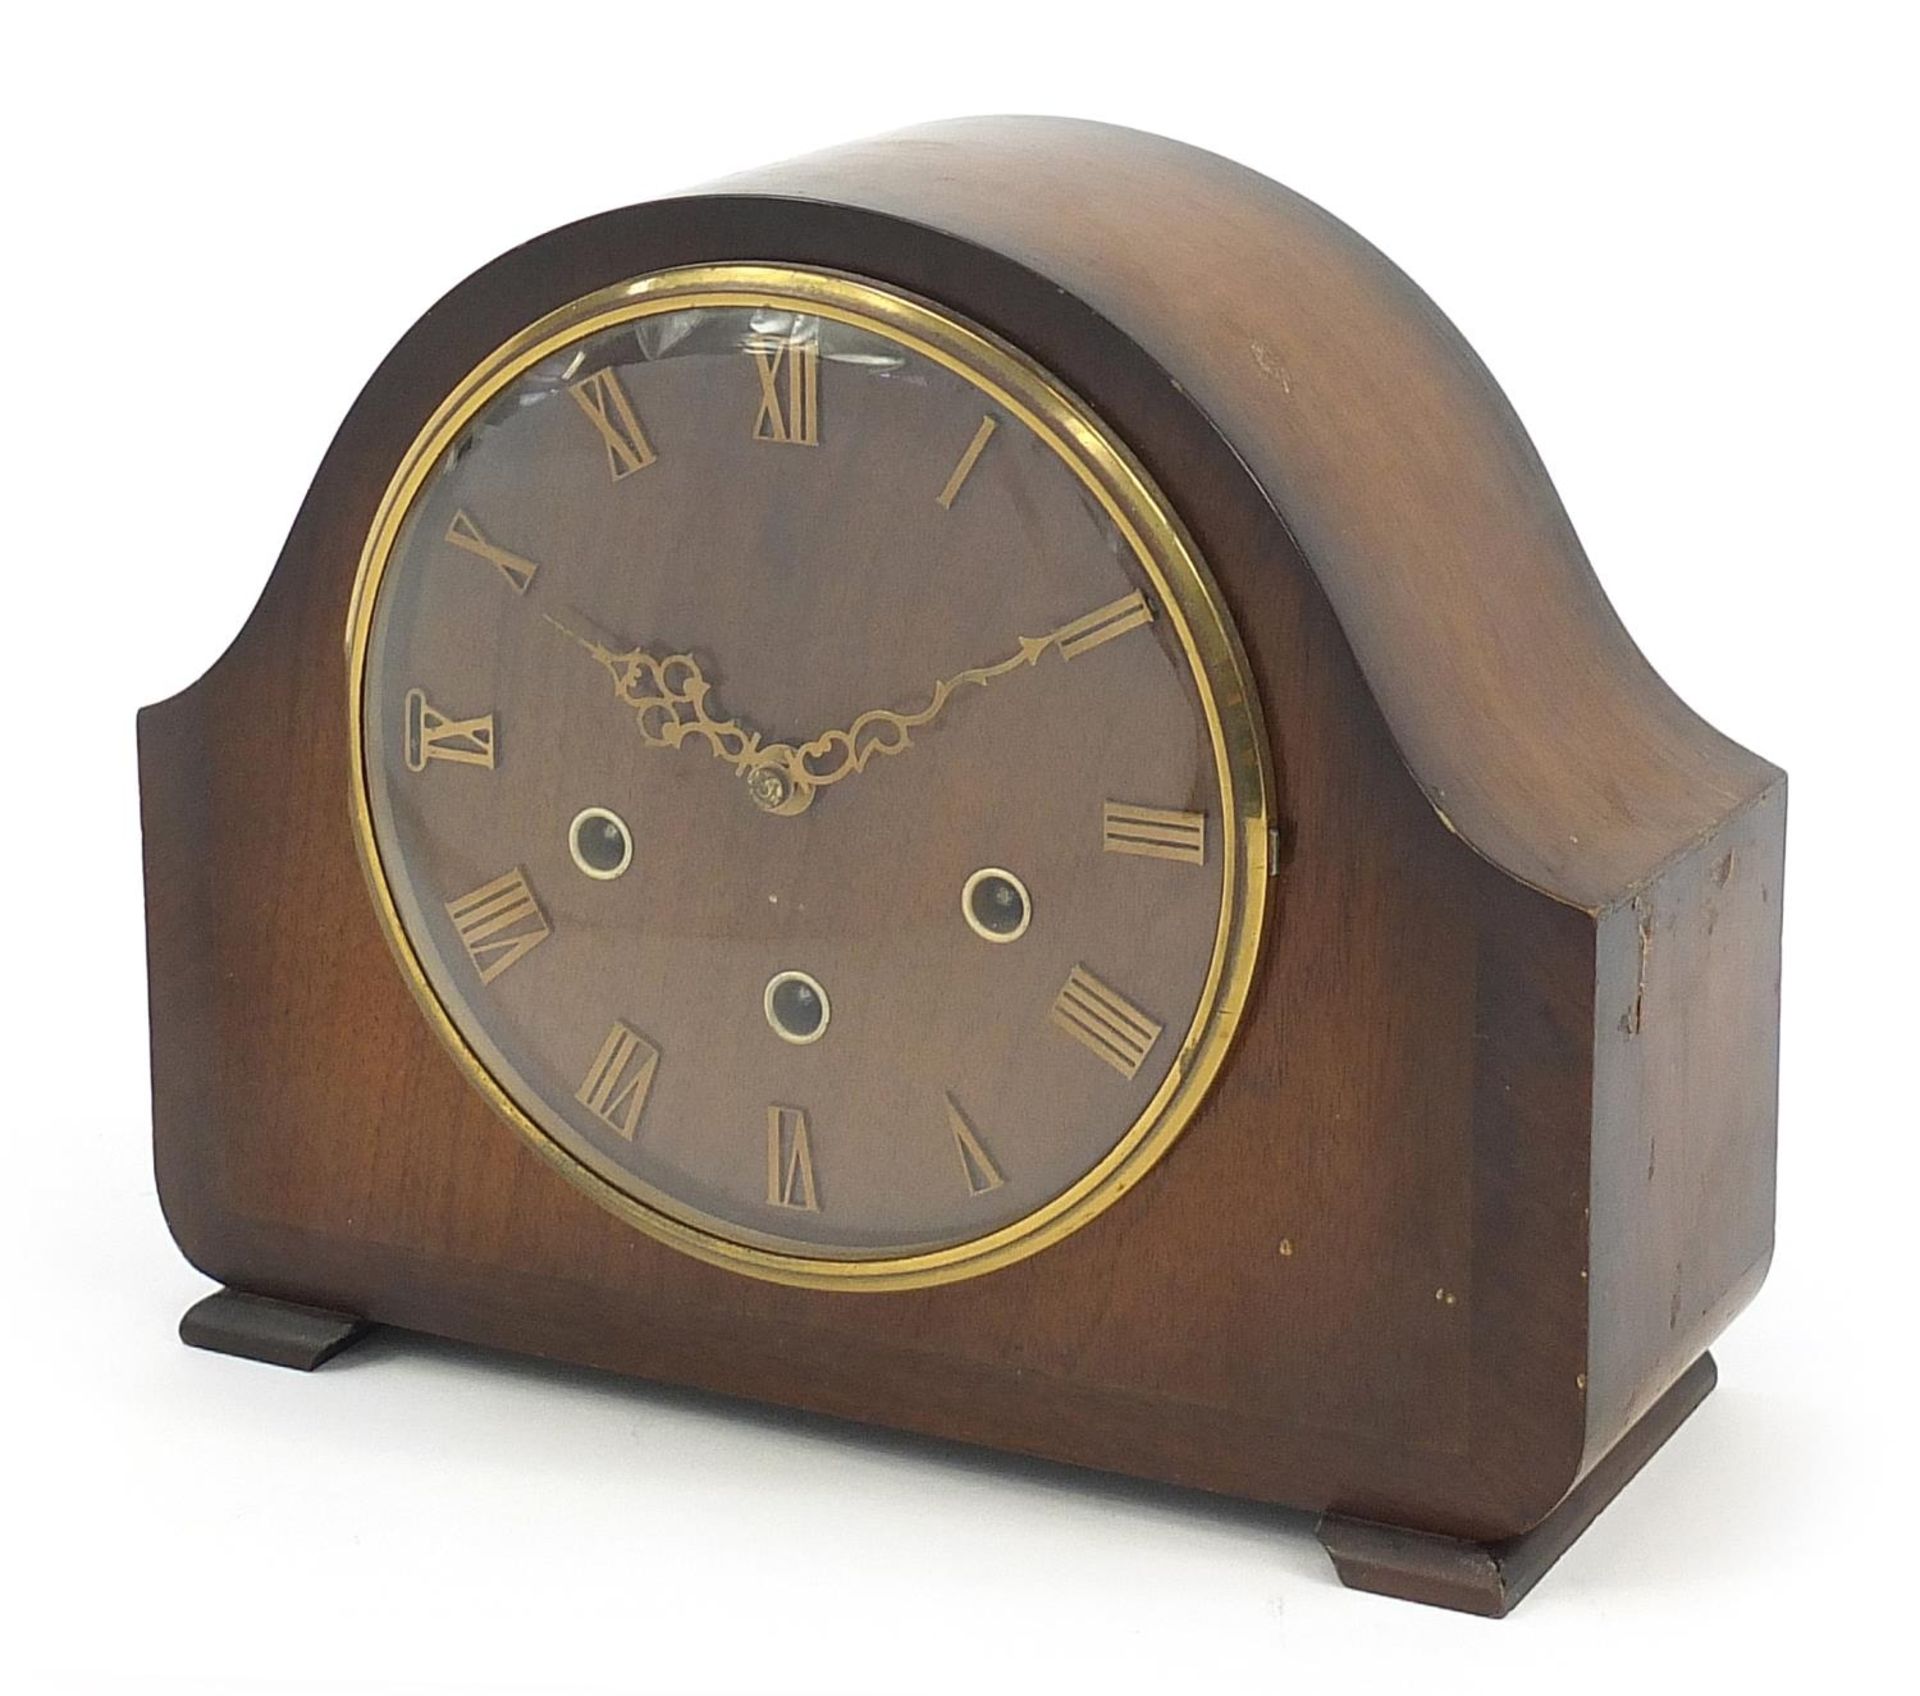 Mahogany cased Smiths mantle clock with Westminster chime, 23.5cm high x 29cm wide